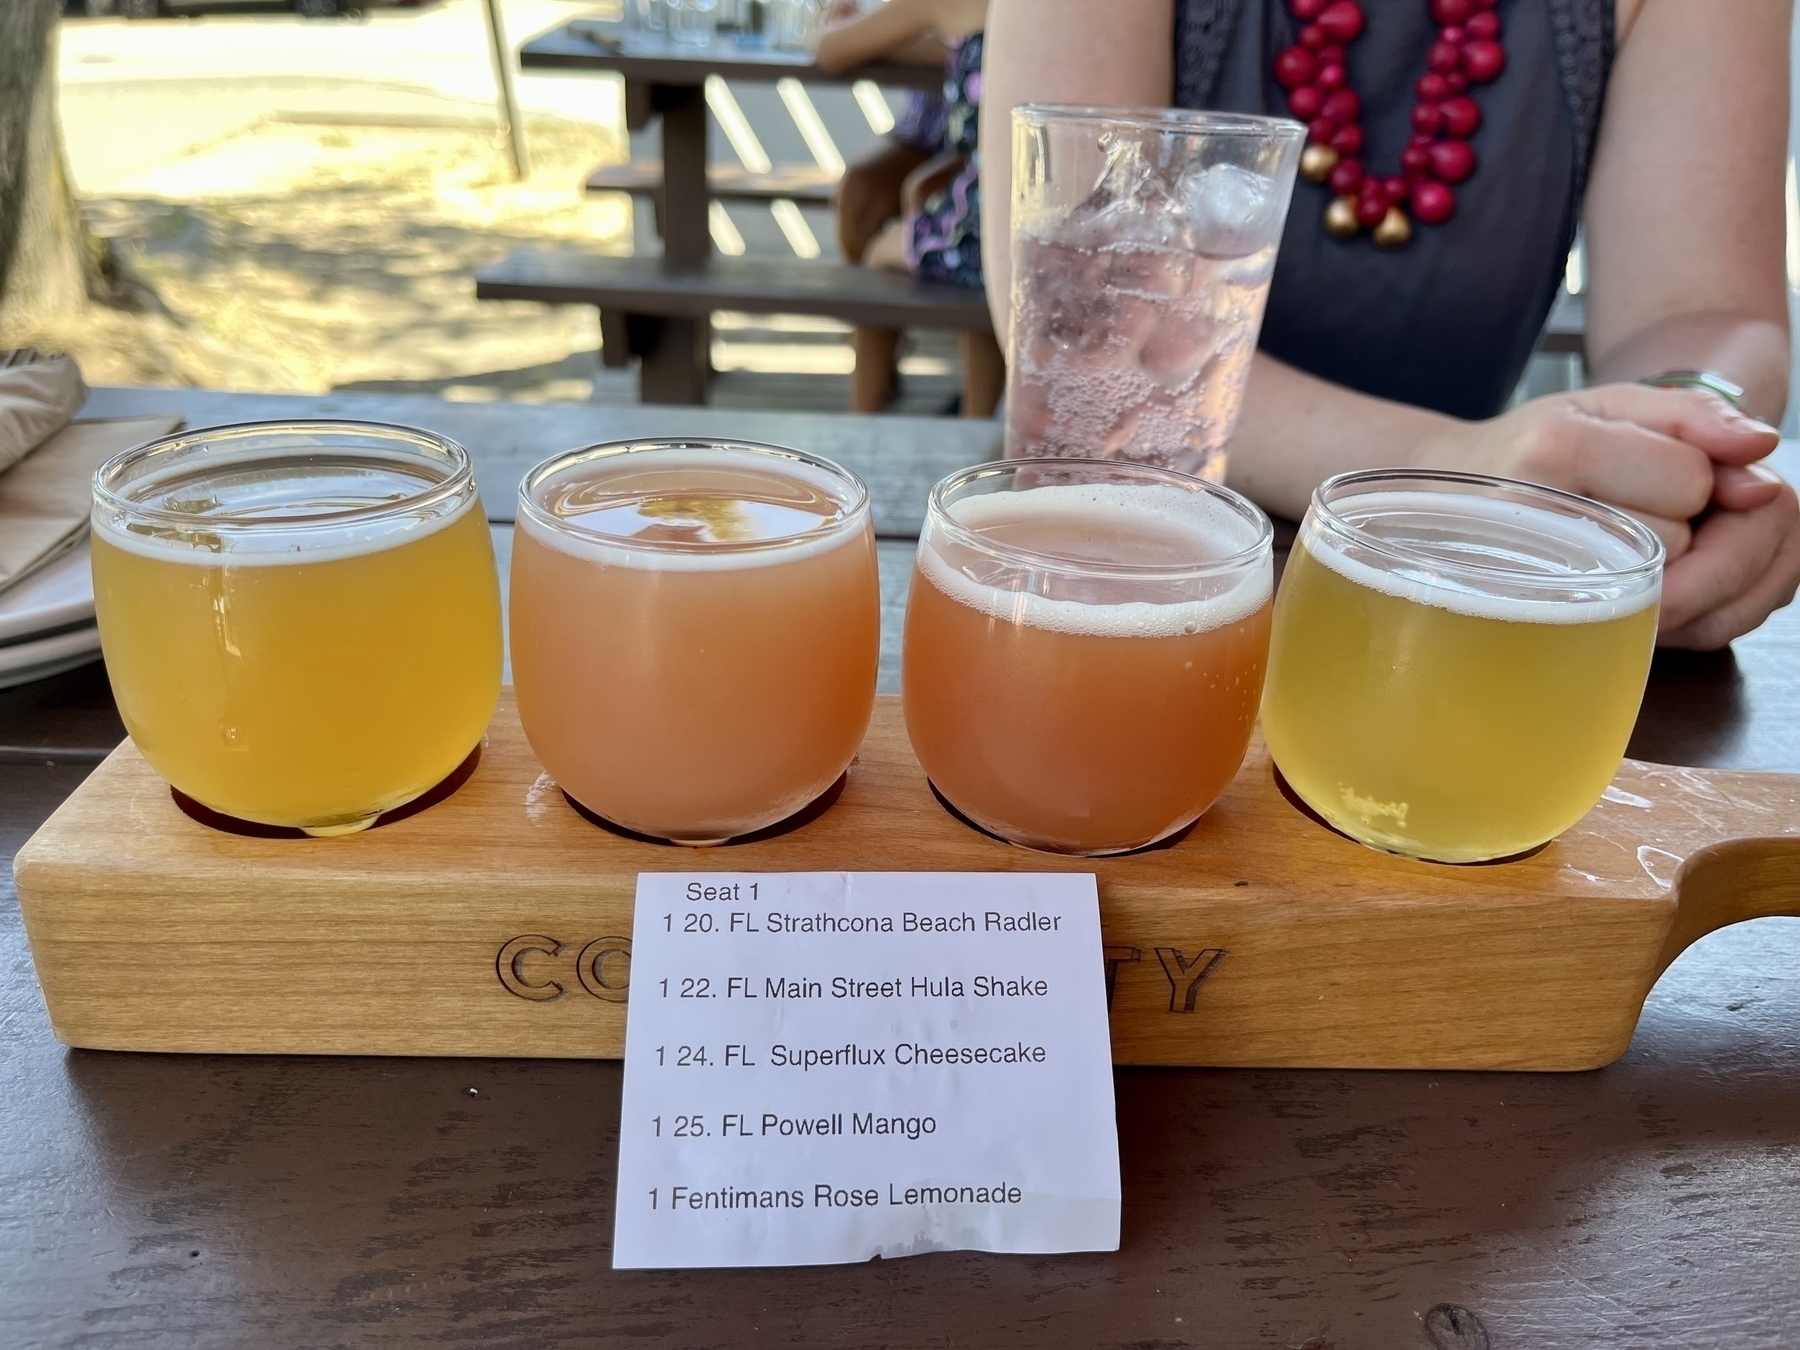 Flight of 4 beer tasters in shades of orange and pink - with a print out listing them &10;&10;Strathcona Beach Radler&10;1 22. FL Main Street Hula Shake&10;1 24. FL Superflux Cheesecake&10;1 25. FL Powell Mango&10;1 Fentimans Rose Lemonade